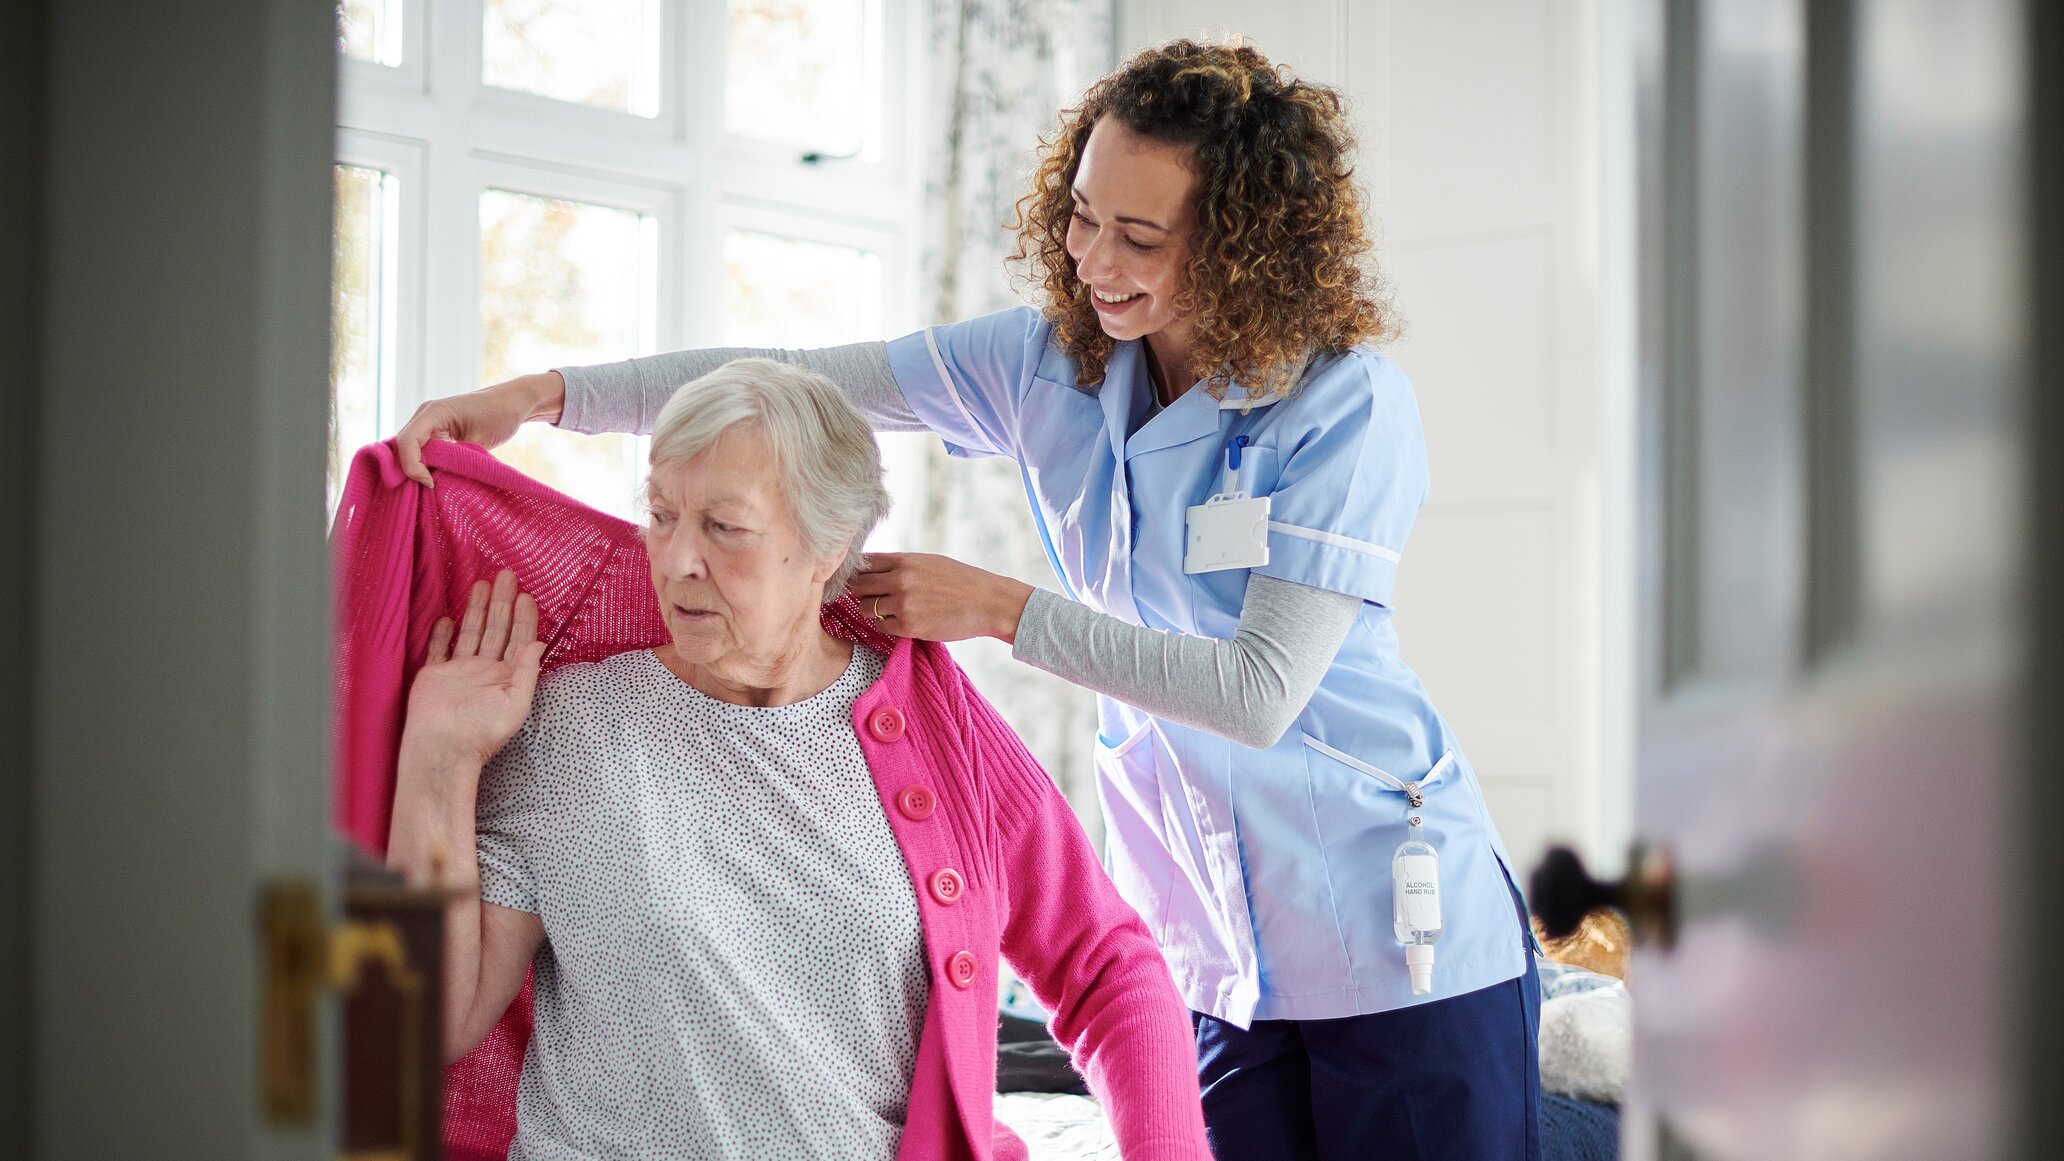 How much does private home care cost per hour?